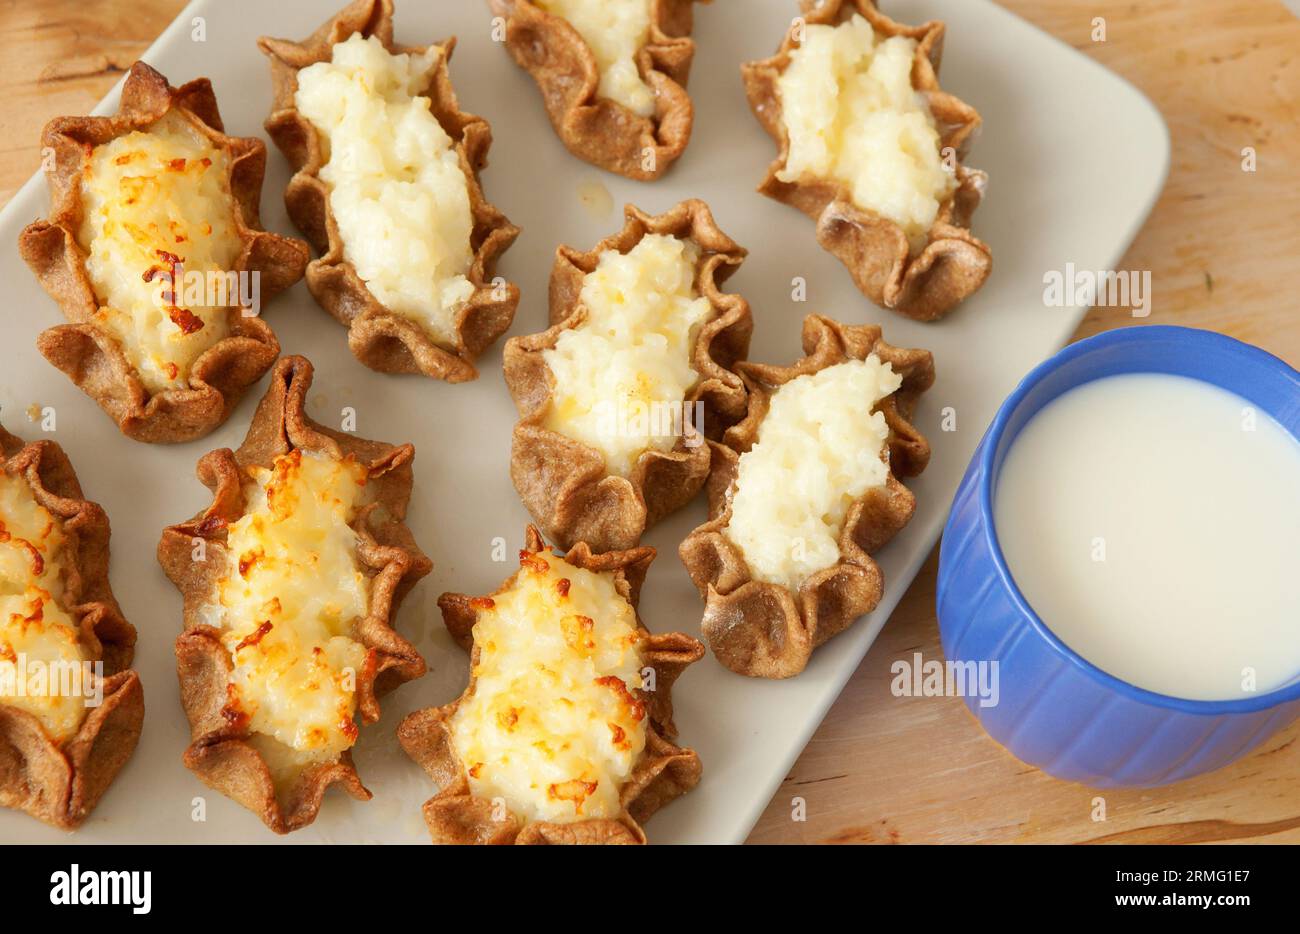 Traditional karelian pasties from Finland with cup of milk Stock Photo